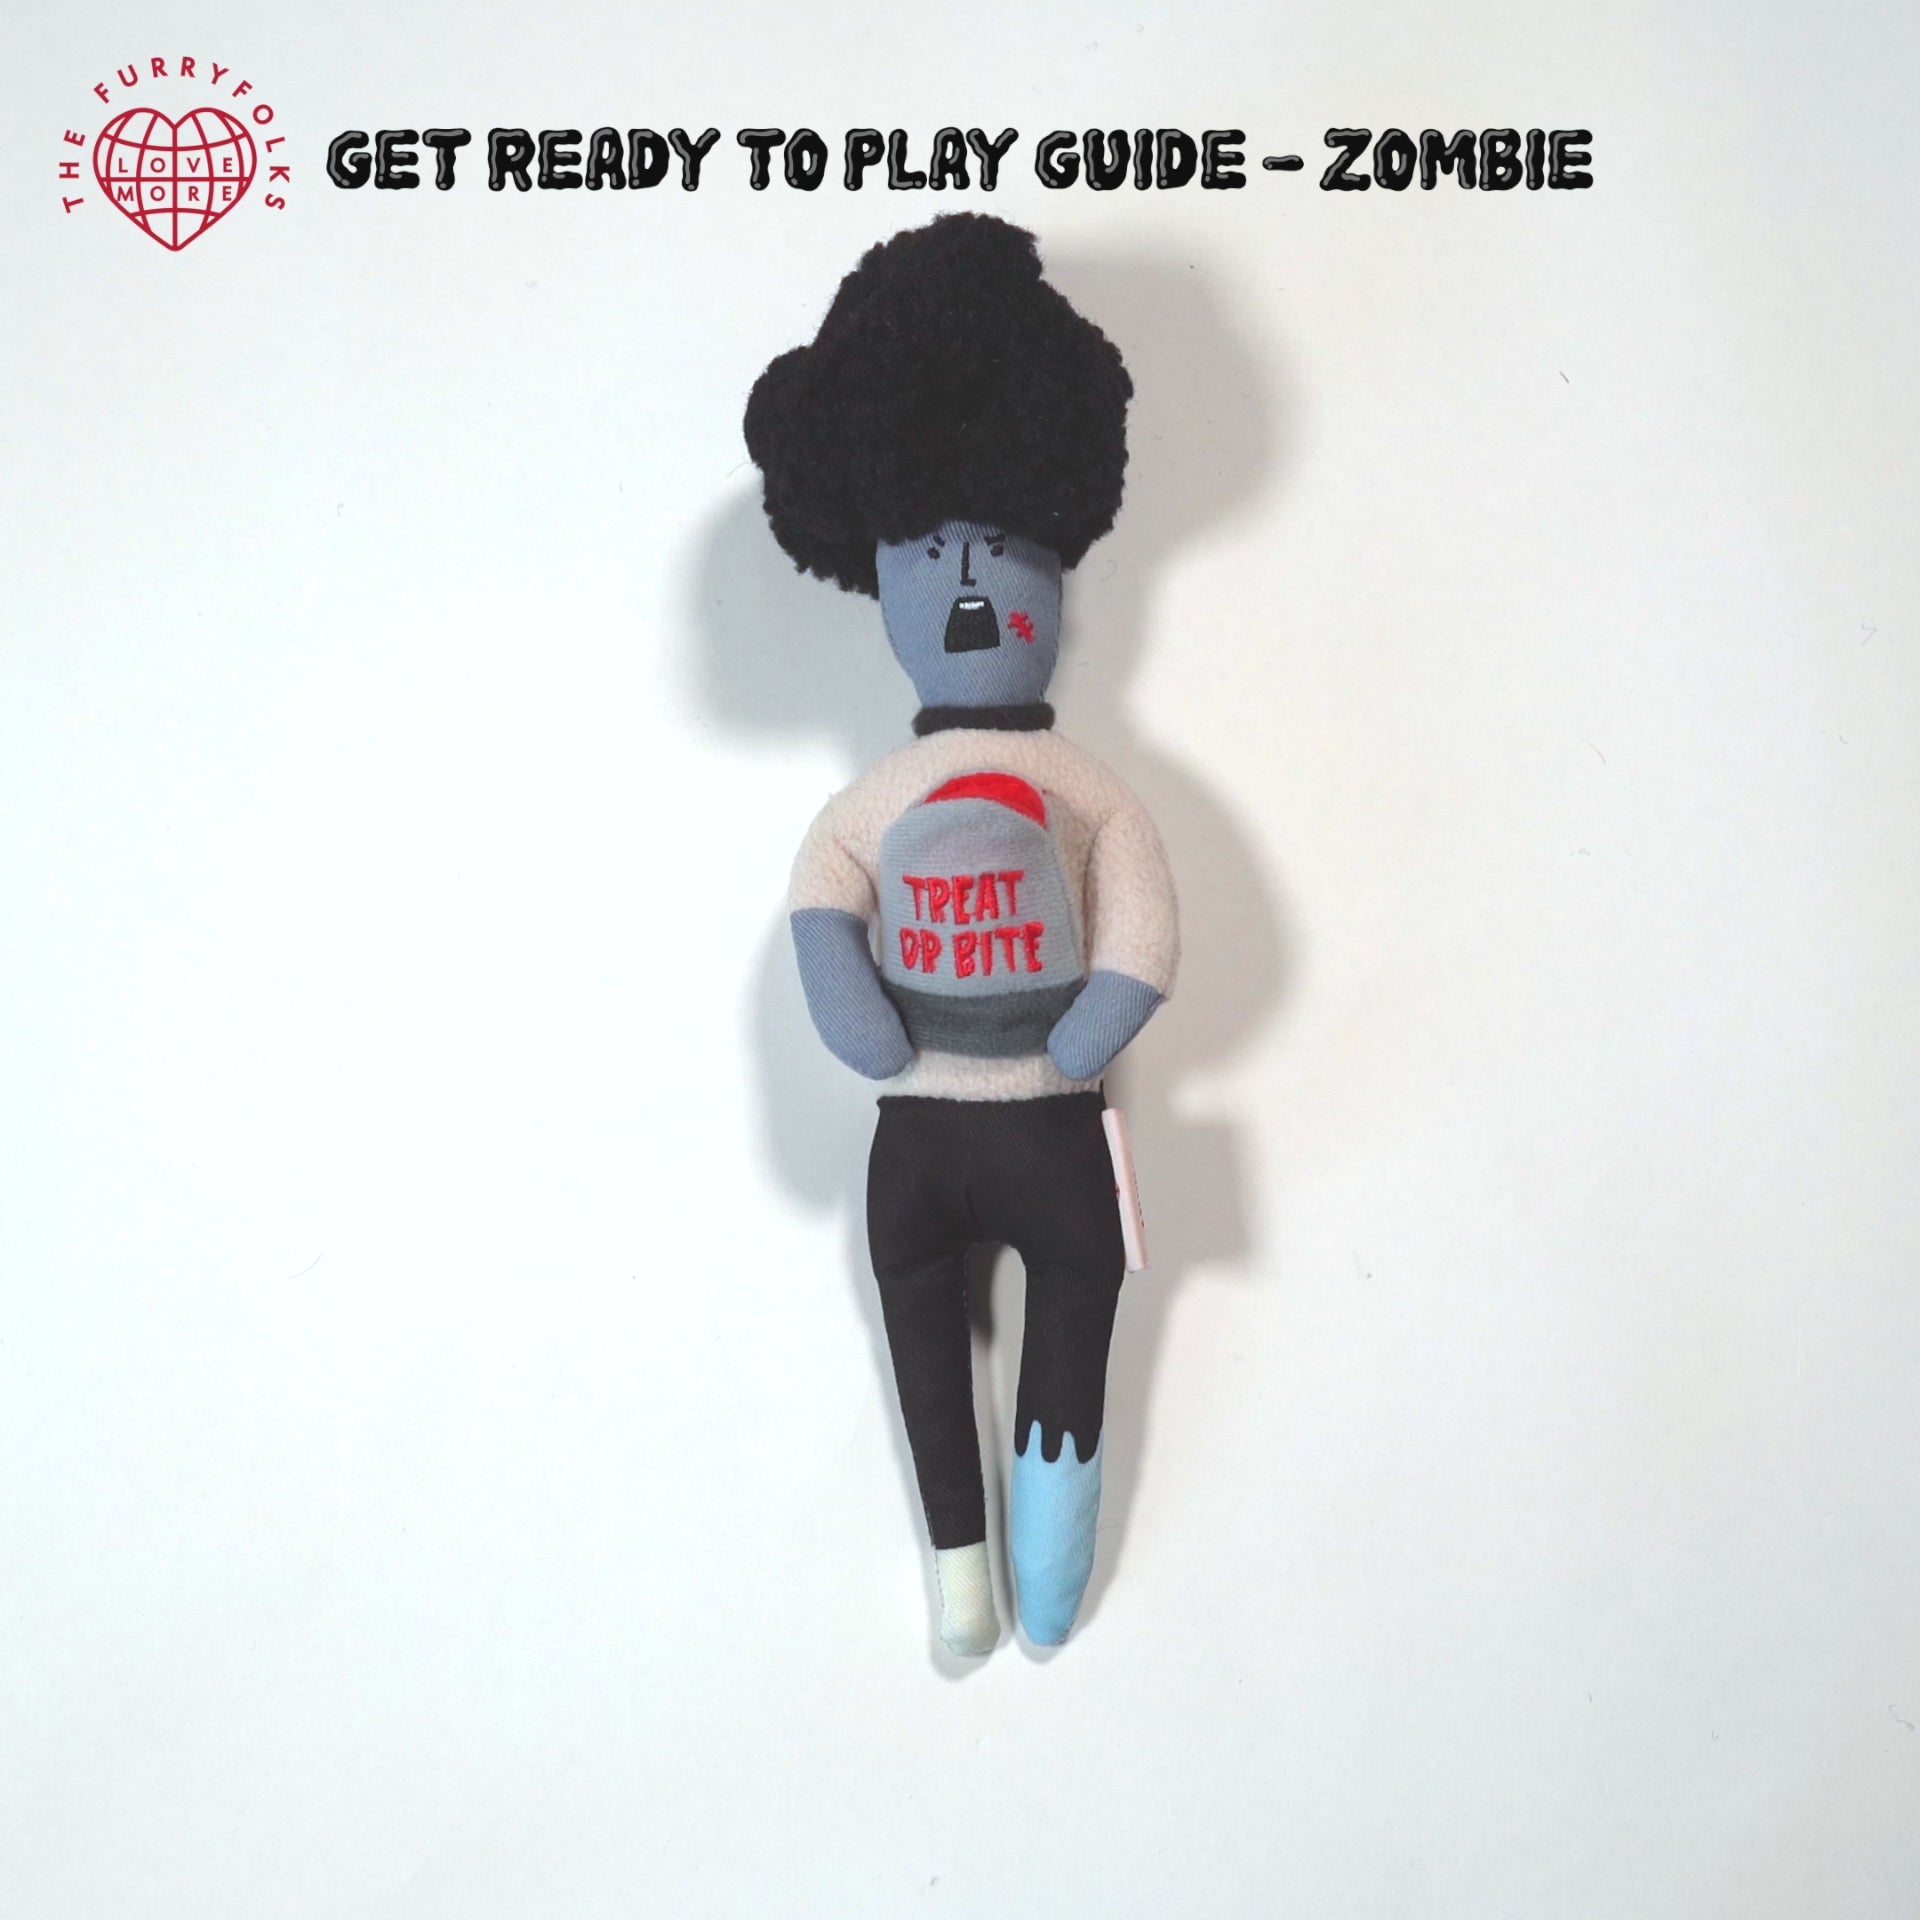 Get Ready To Play Guide - Zombie (Video)